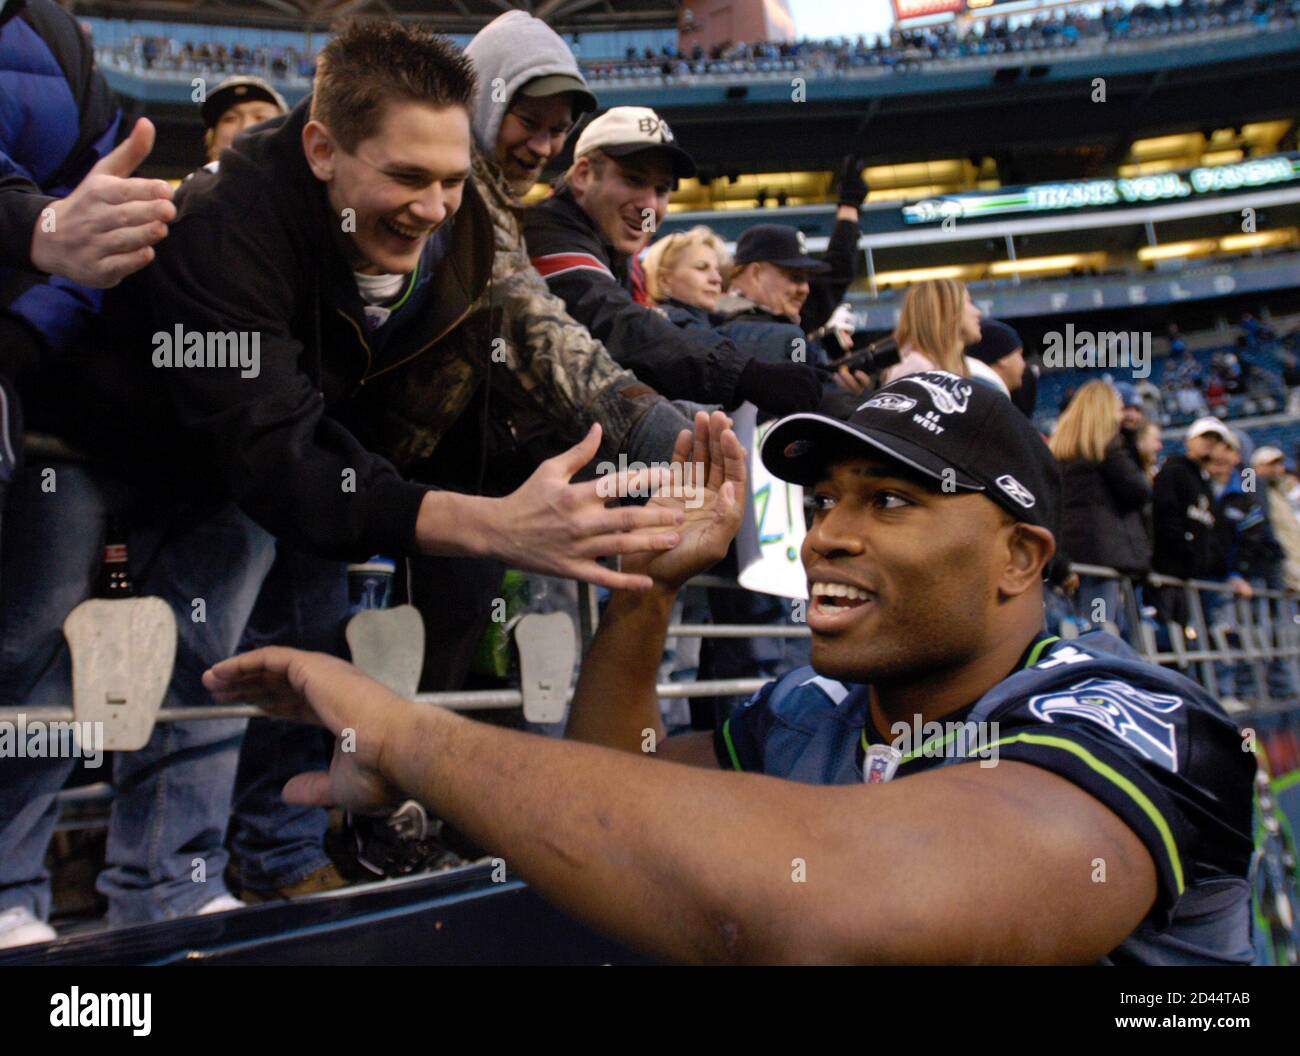 Seattle Seahawks running back Shaun Alexander high-fives fans at Qwest Field in Seattle, January 2, 2005, after the Seahawks beat the Atlanta Falcons, 28-26 to win the NFC West division title. REUTERS/Robert Sorbo  RSS Stock Photo